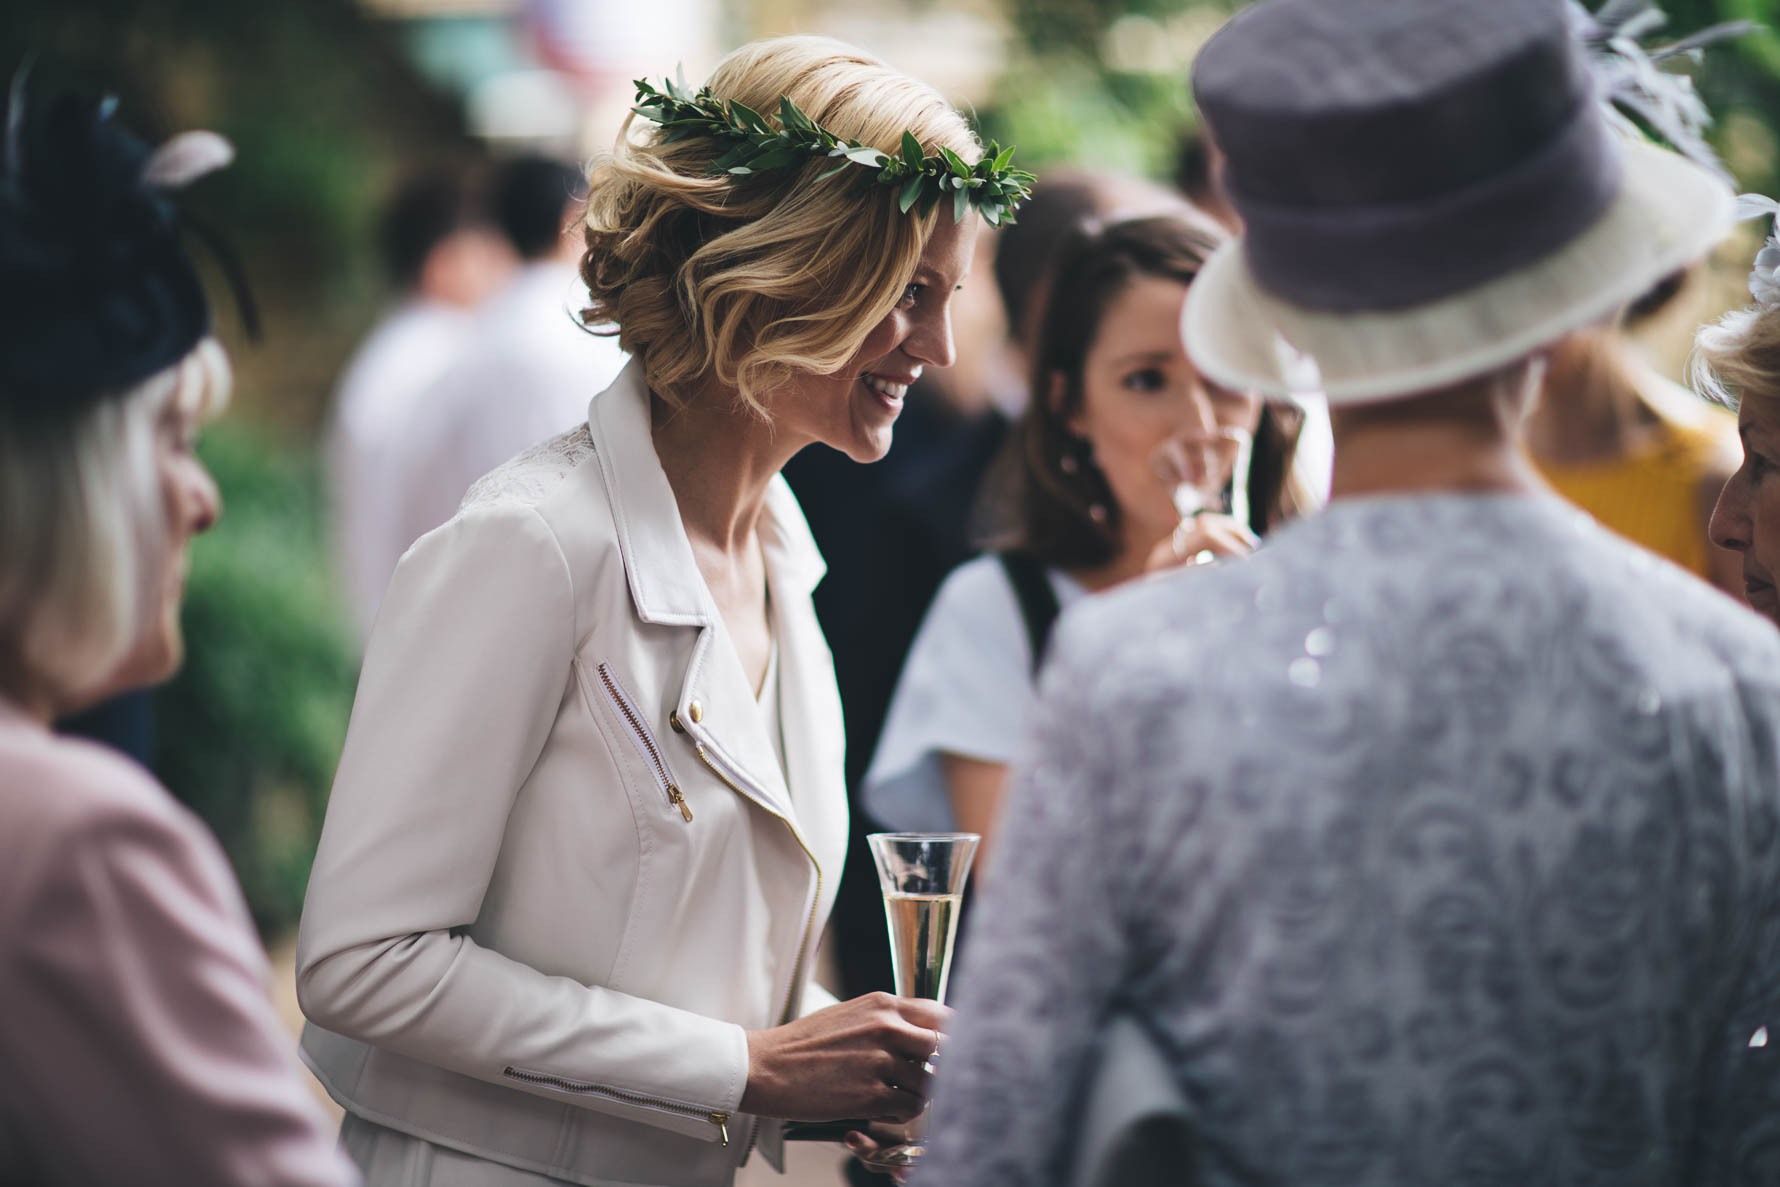 Bride wearing a white leather jacket and a leaf garland in her hair, holding a glass of champagne chatting to some female wedding guests outside